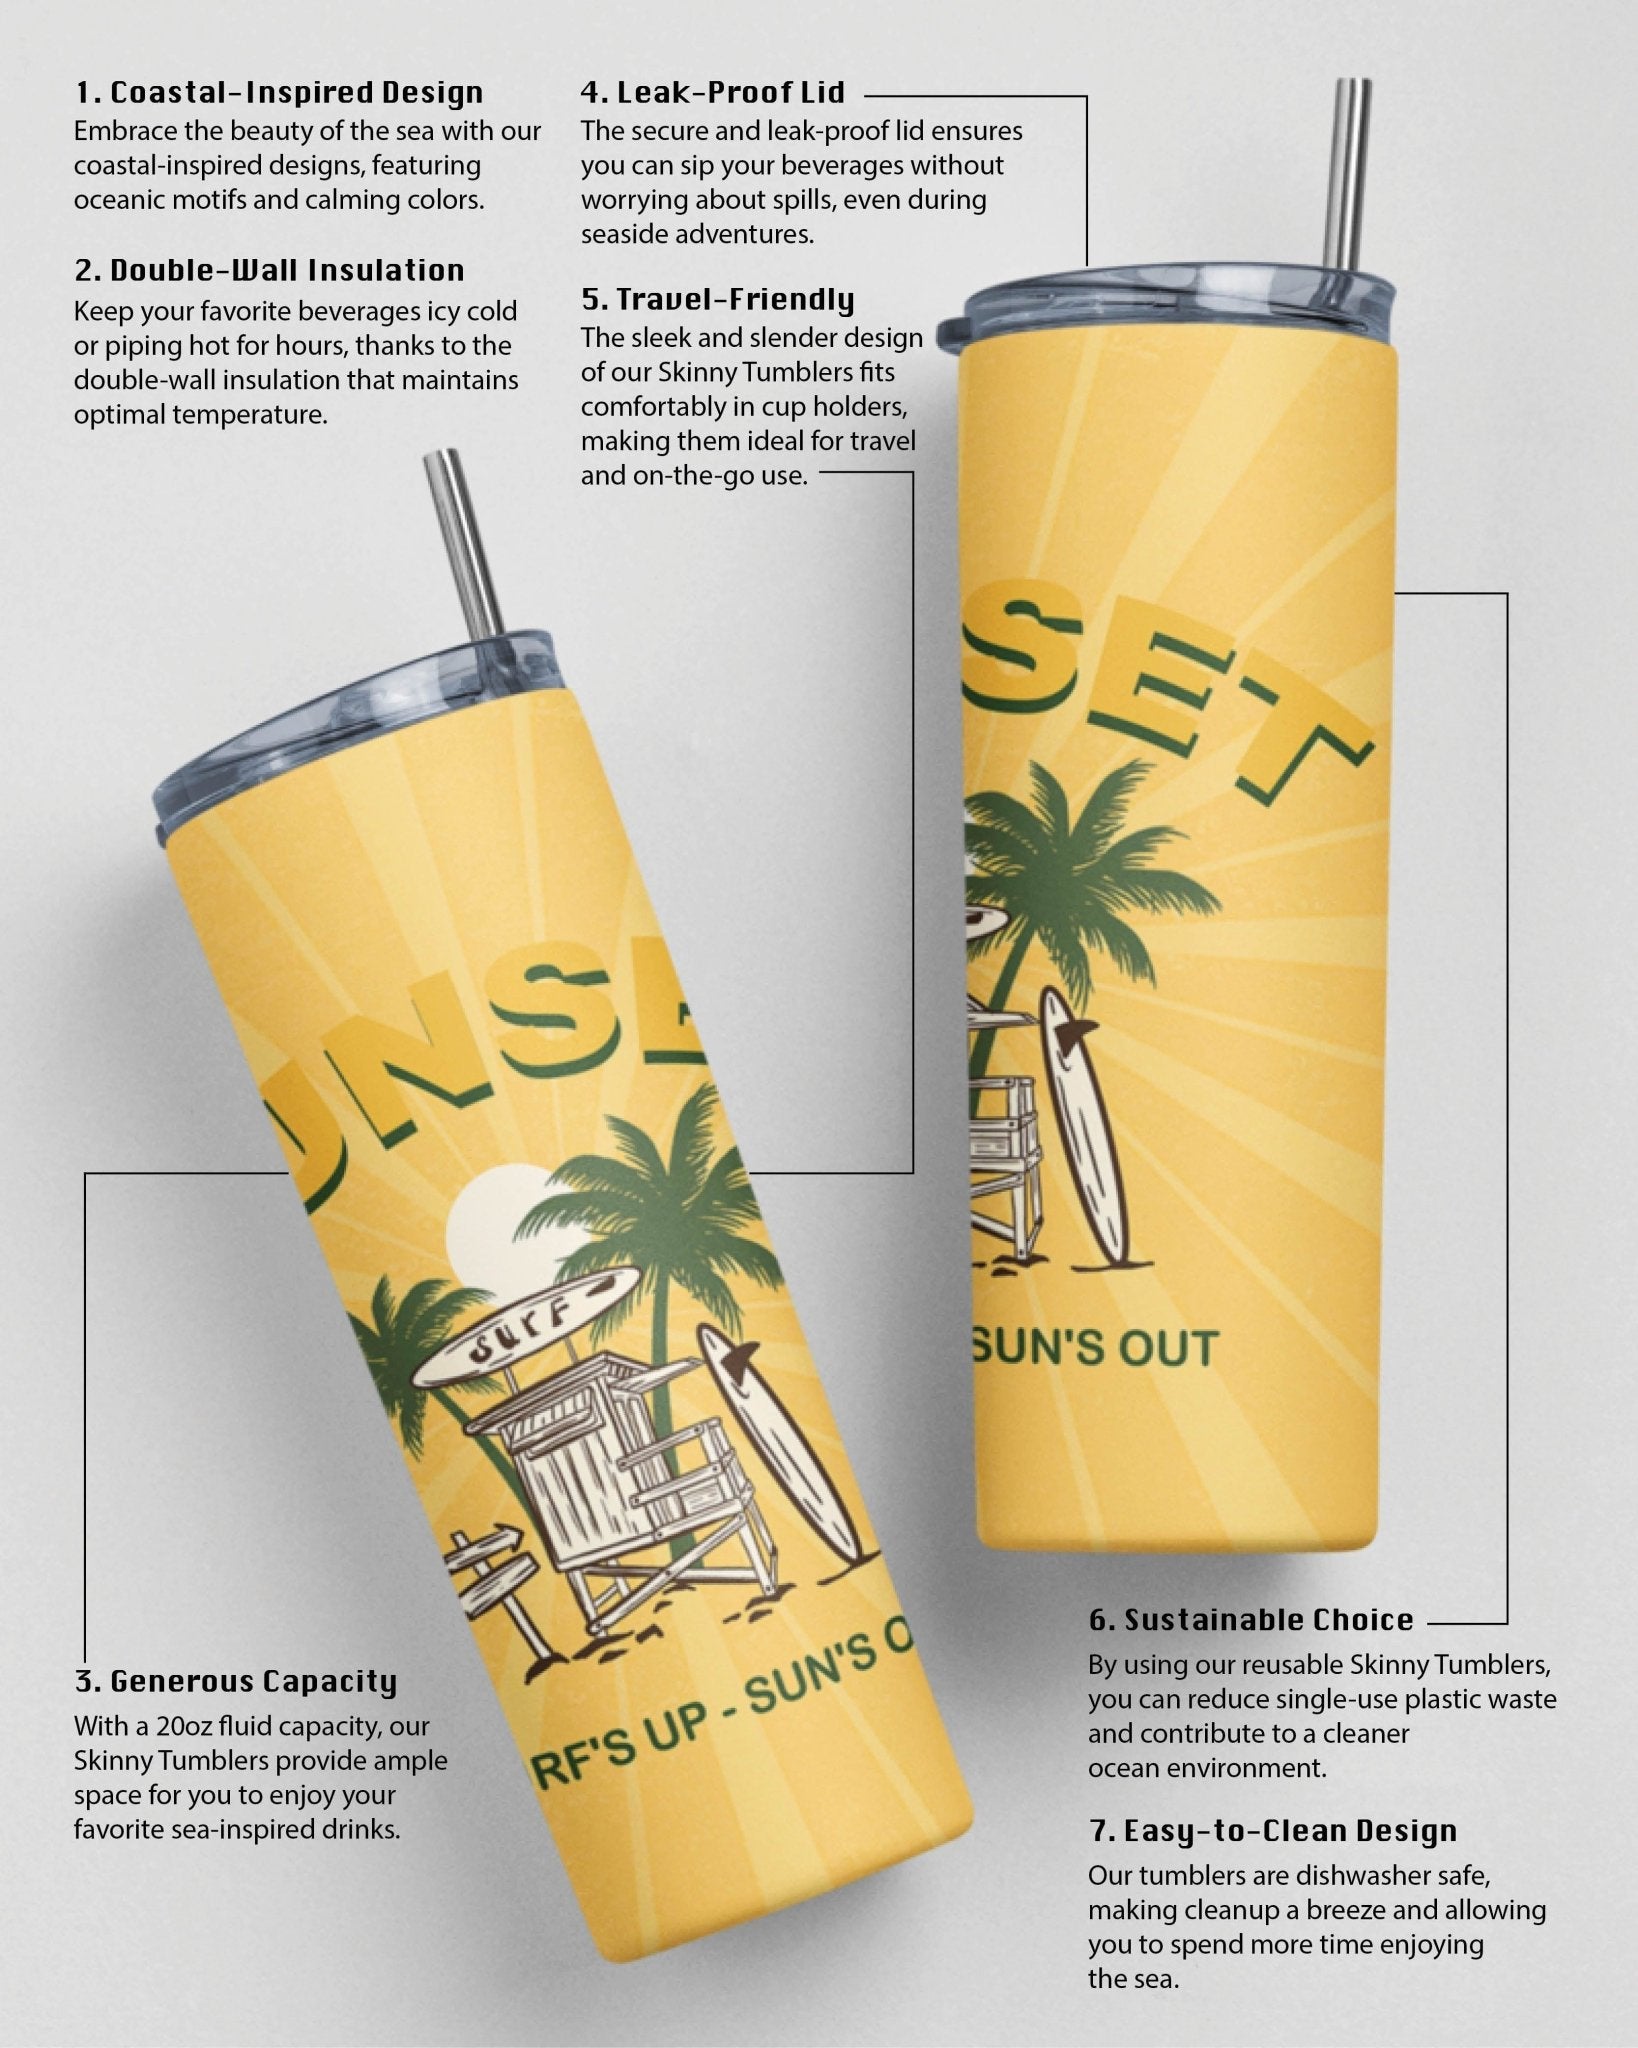 Surf's Up Sun's Out Skinny Tumbler - DEEP-END